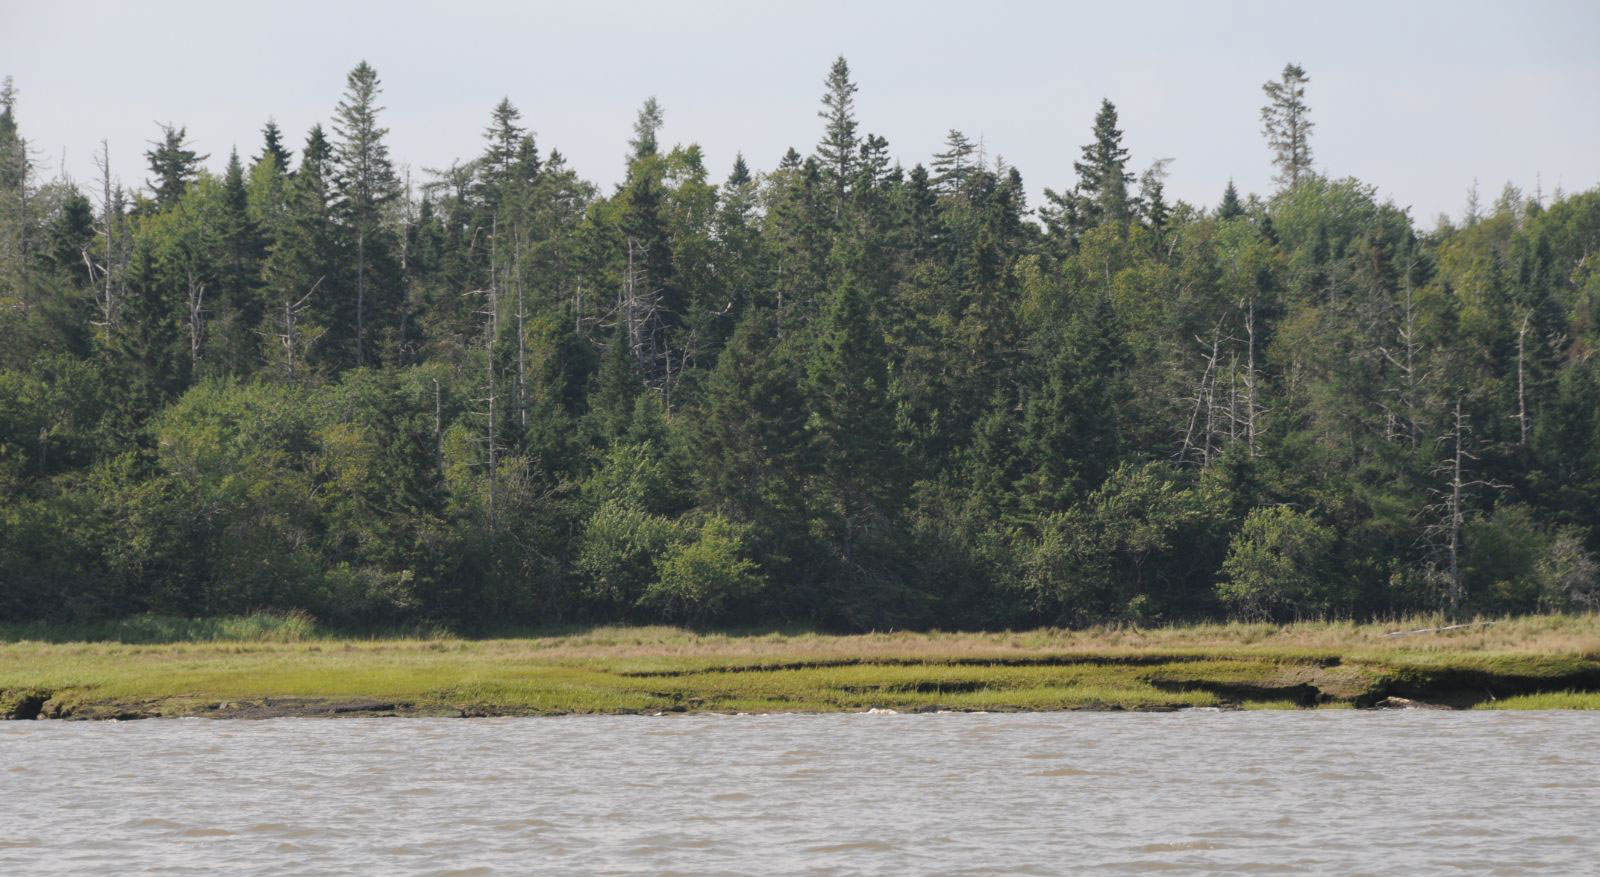 View of Marsh Island from river